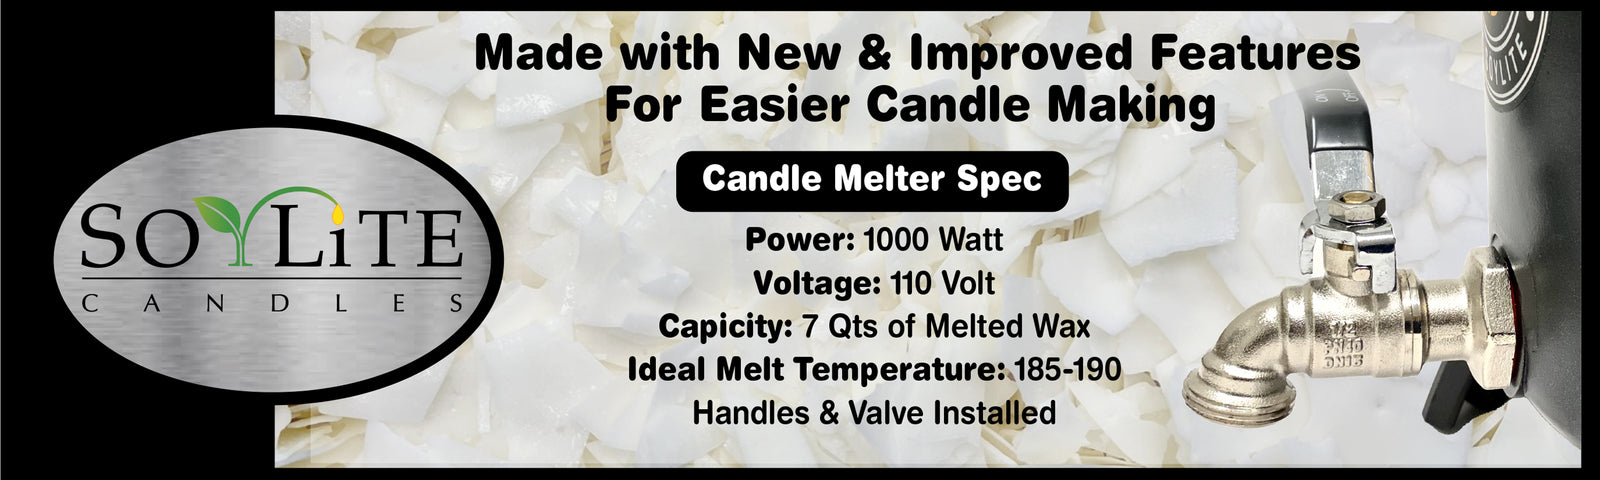 Wax Melter for Candle Making - Holds Approximately 6 Qts of Melted Wax - Easy Pour Valve - Free eBook - by Soylite Candles